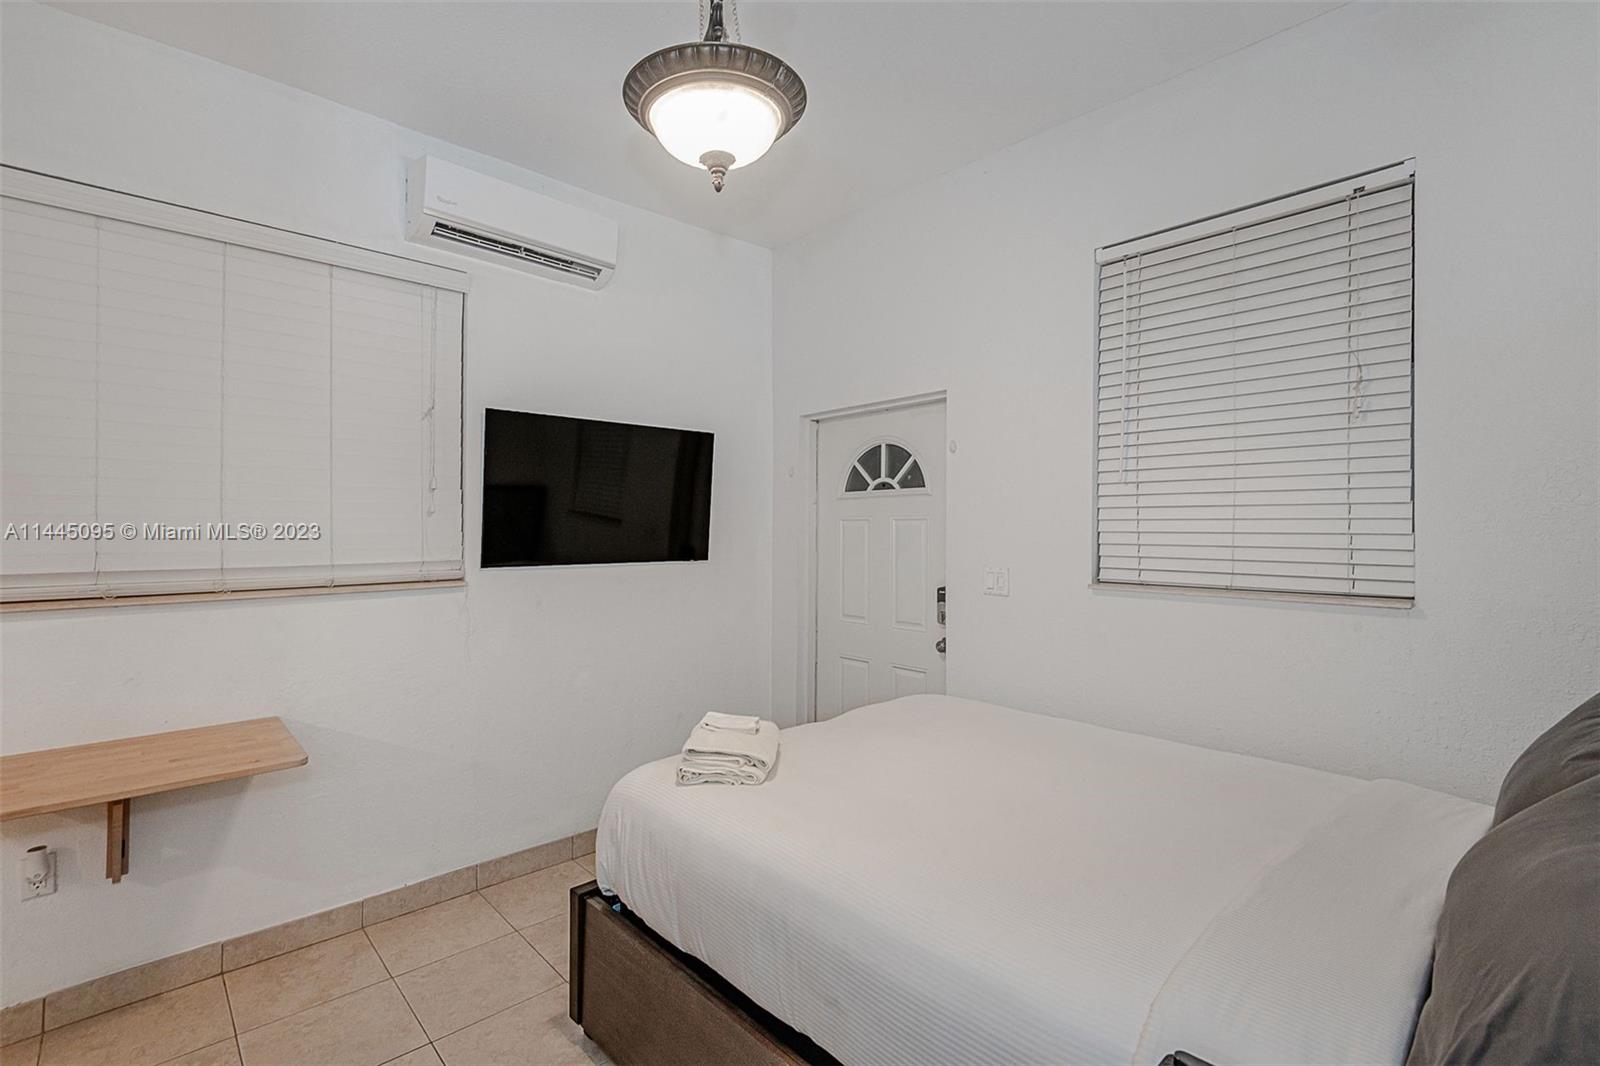 Photo 8 of Holleman Park Apt 2 in Miami - MLS A11445095